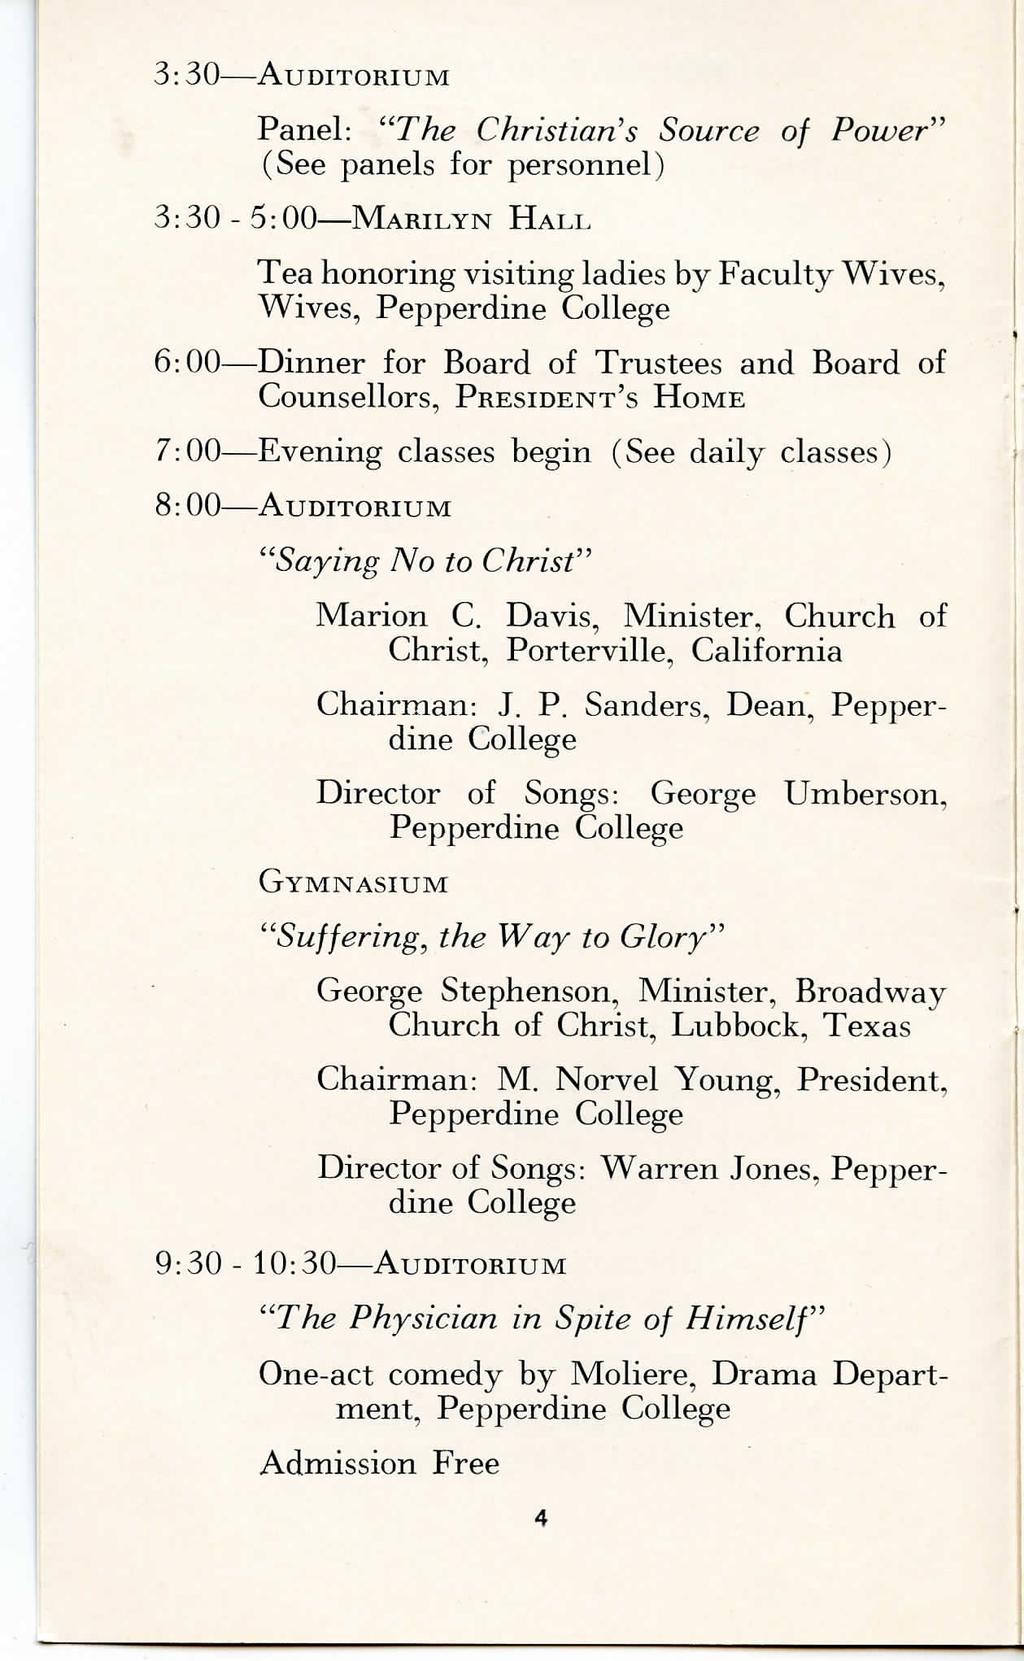 3:30 AUDITORIUM Panel: "The Christian's Source of Power" (See panels for personnel) 3:30-5:00 MARILYN HAIJ, Tea honoring visiting ladies by Faculty Wives, Wives, Pepperdine 6:00 Dinner for Board of